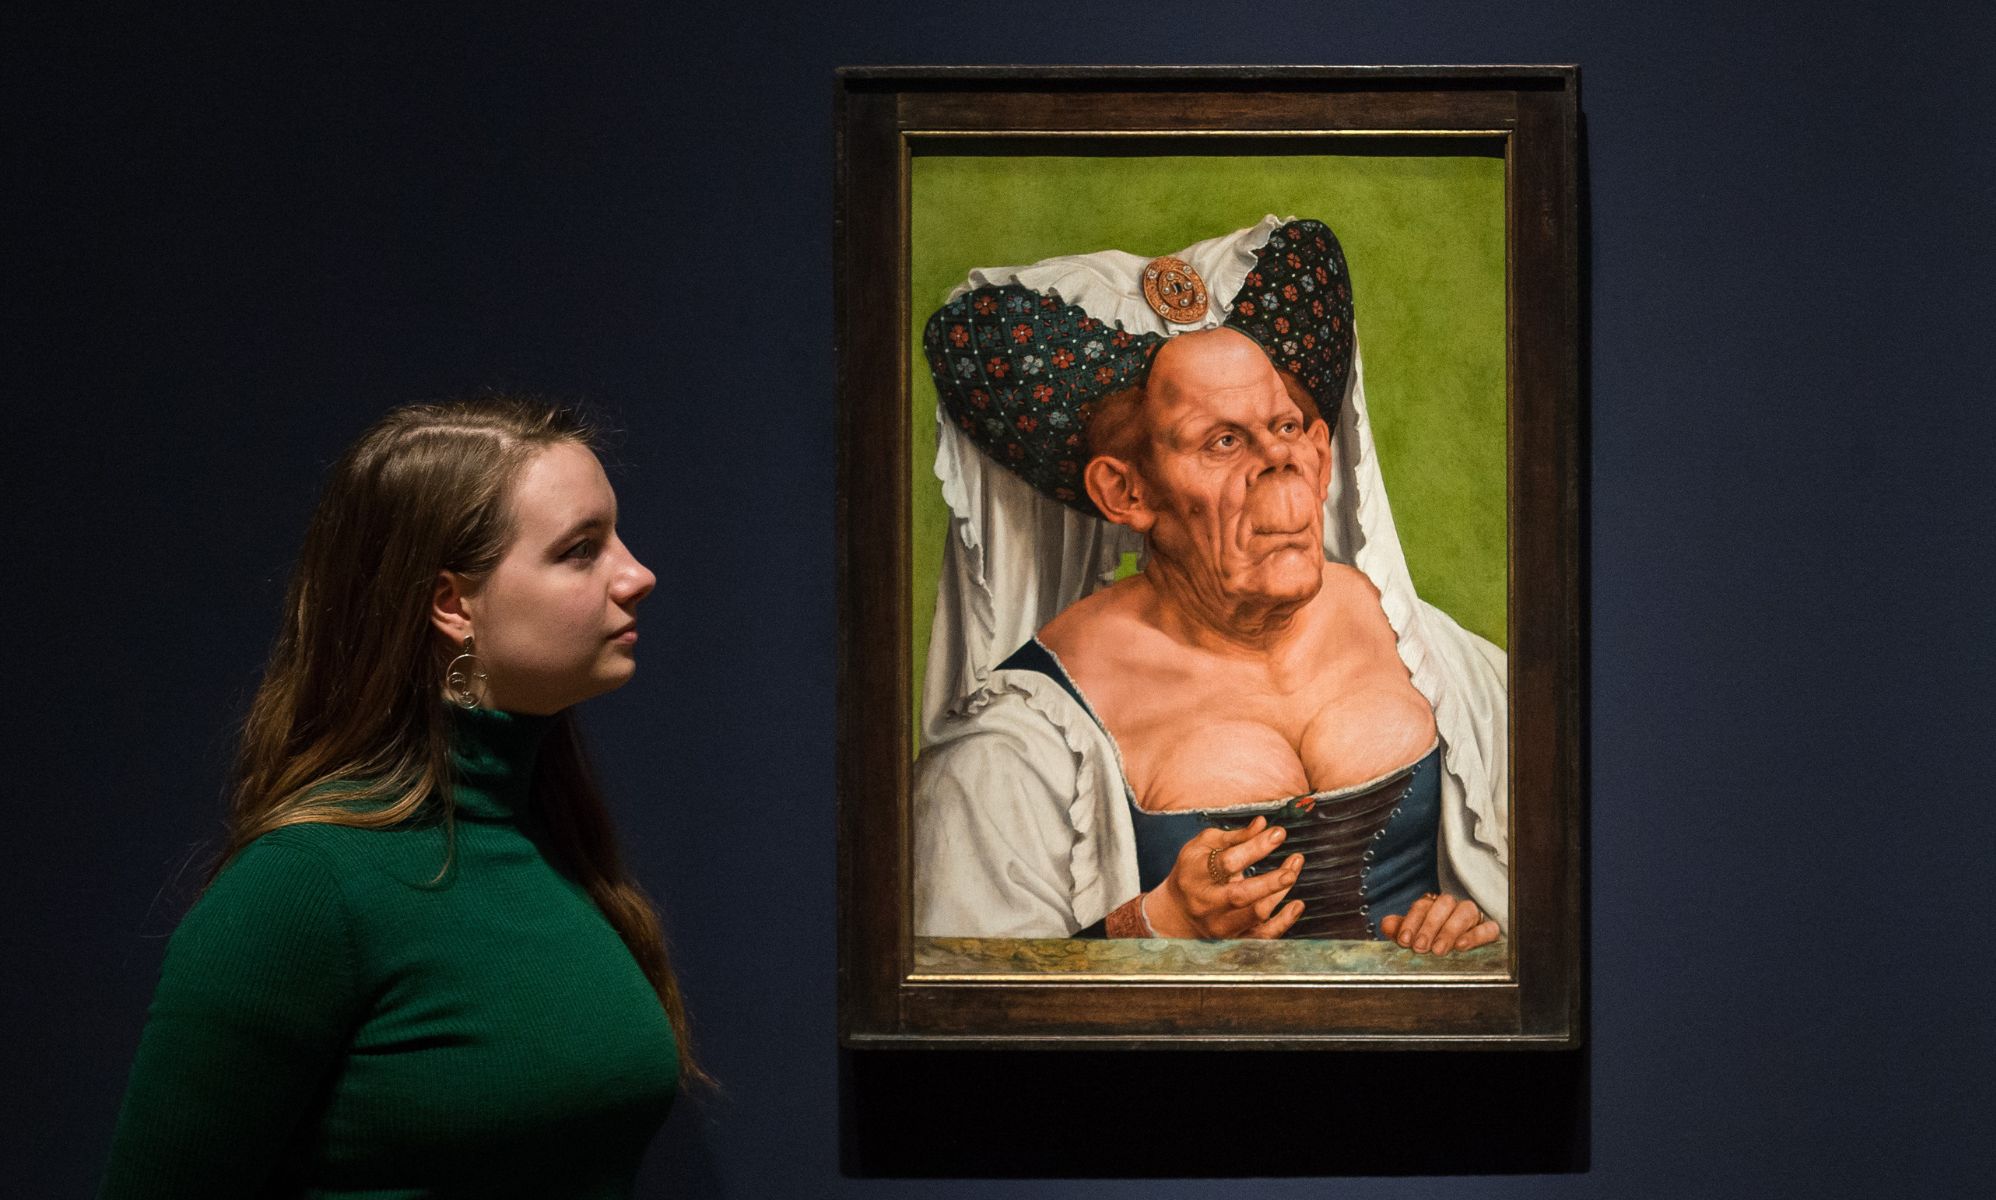 The Ugly Duchess is shown off at the National Gallery